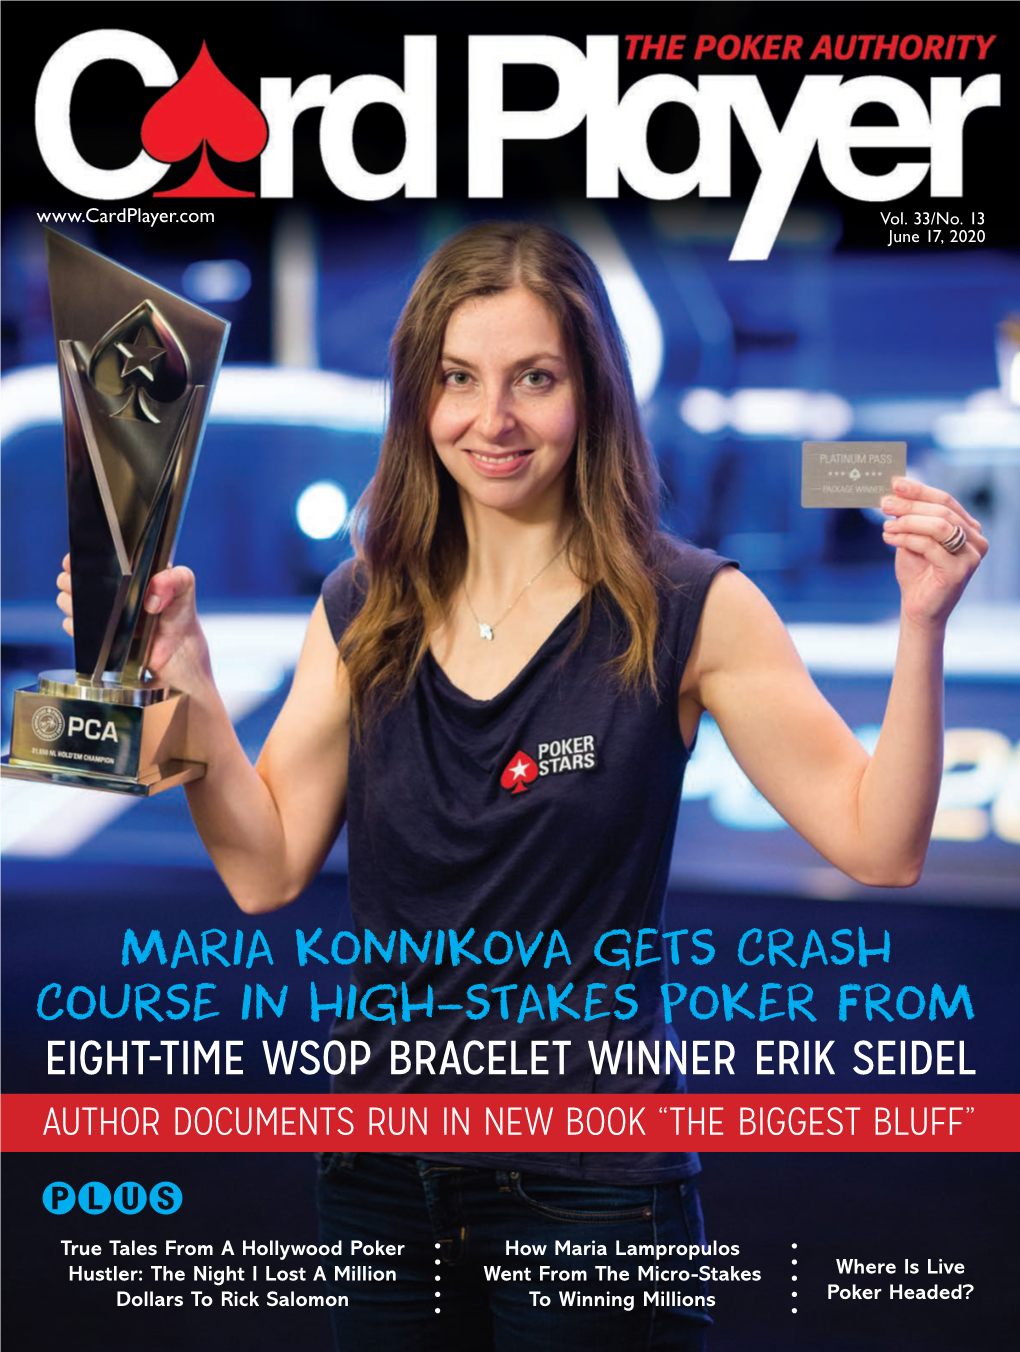 Maria Konnikova Gets Crash Course in High-Stakes Poker from Eight-Time Wsop Bracelet Winner Erik Seidel Author Documents Run in New Book “The Biggest Bluff”